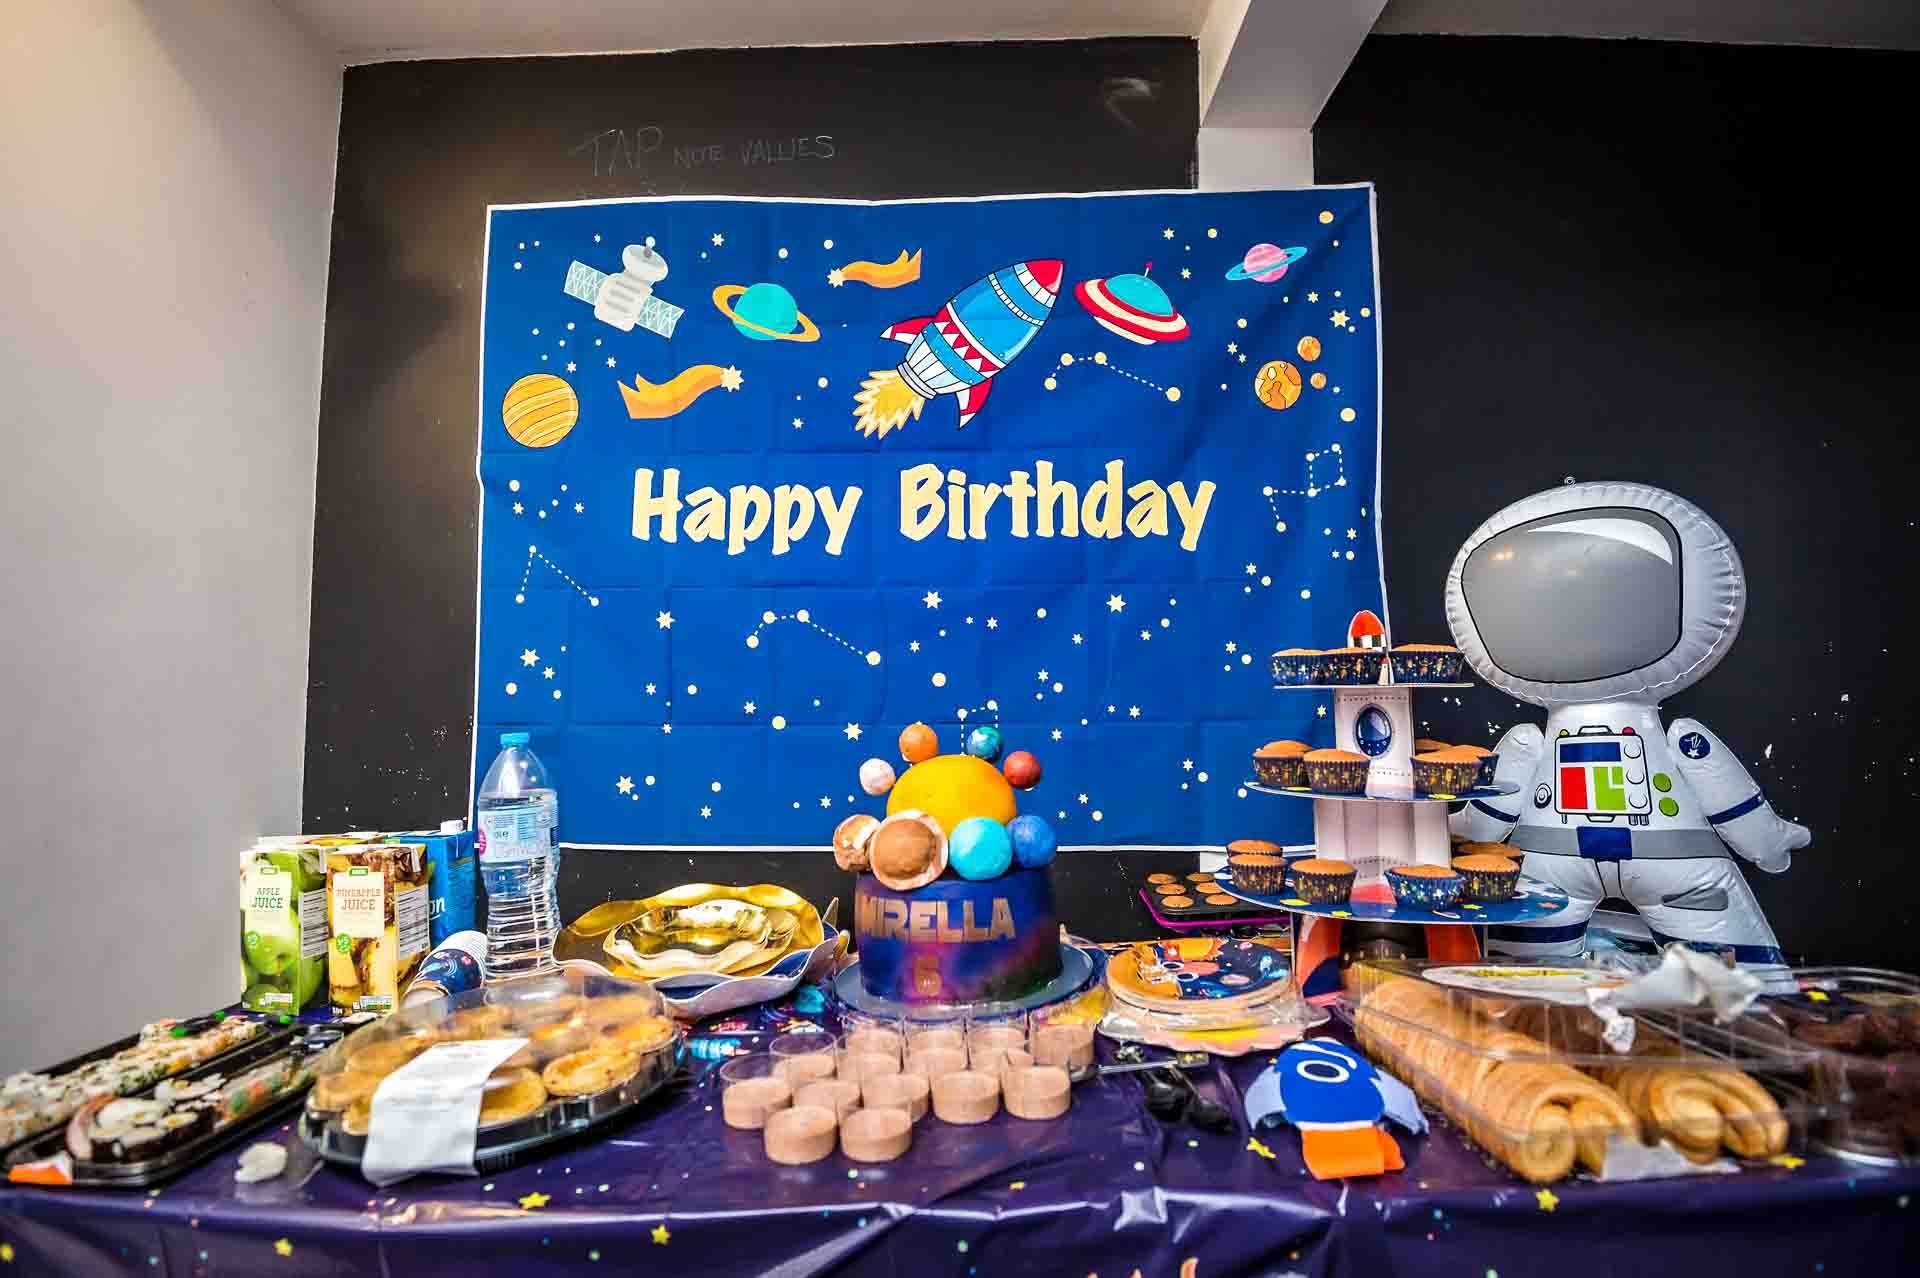 Table of food and cake with 'Happy Birthday' sign laid out for child's party